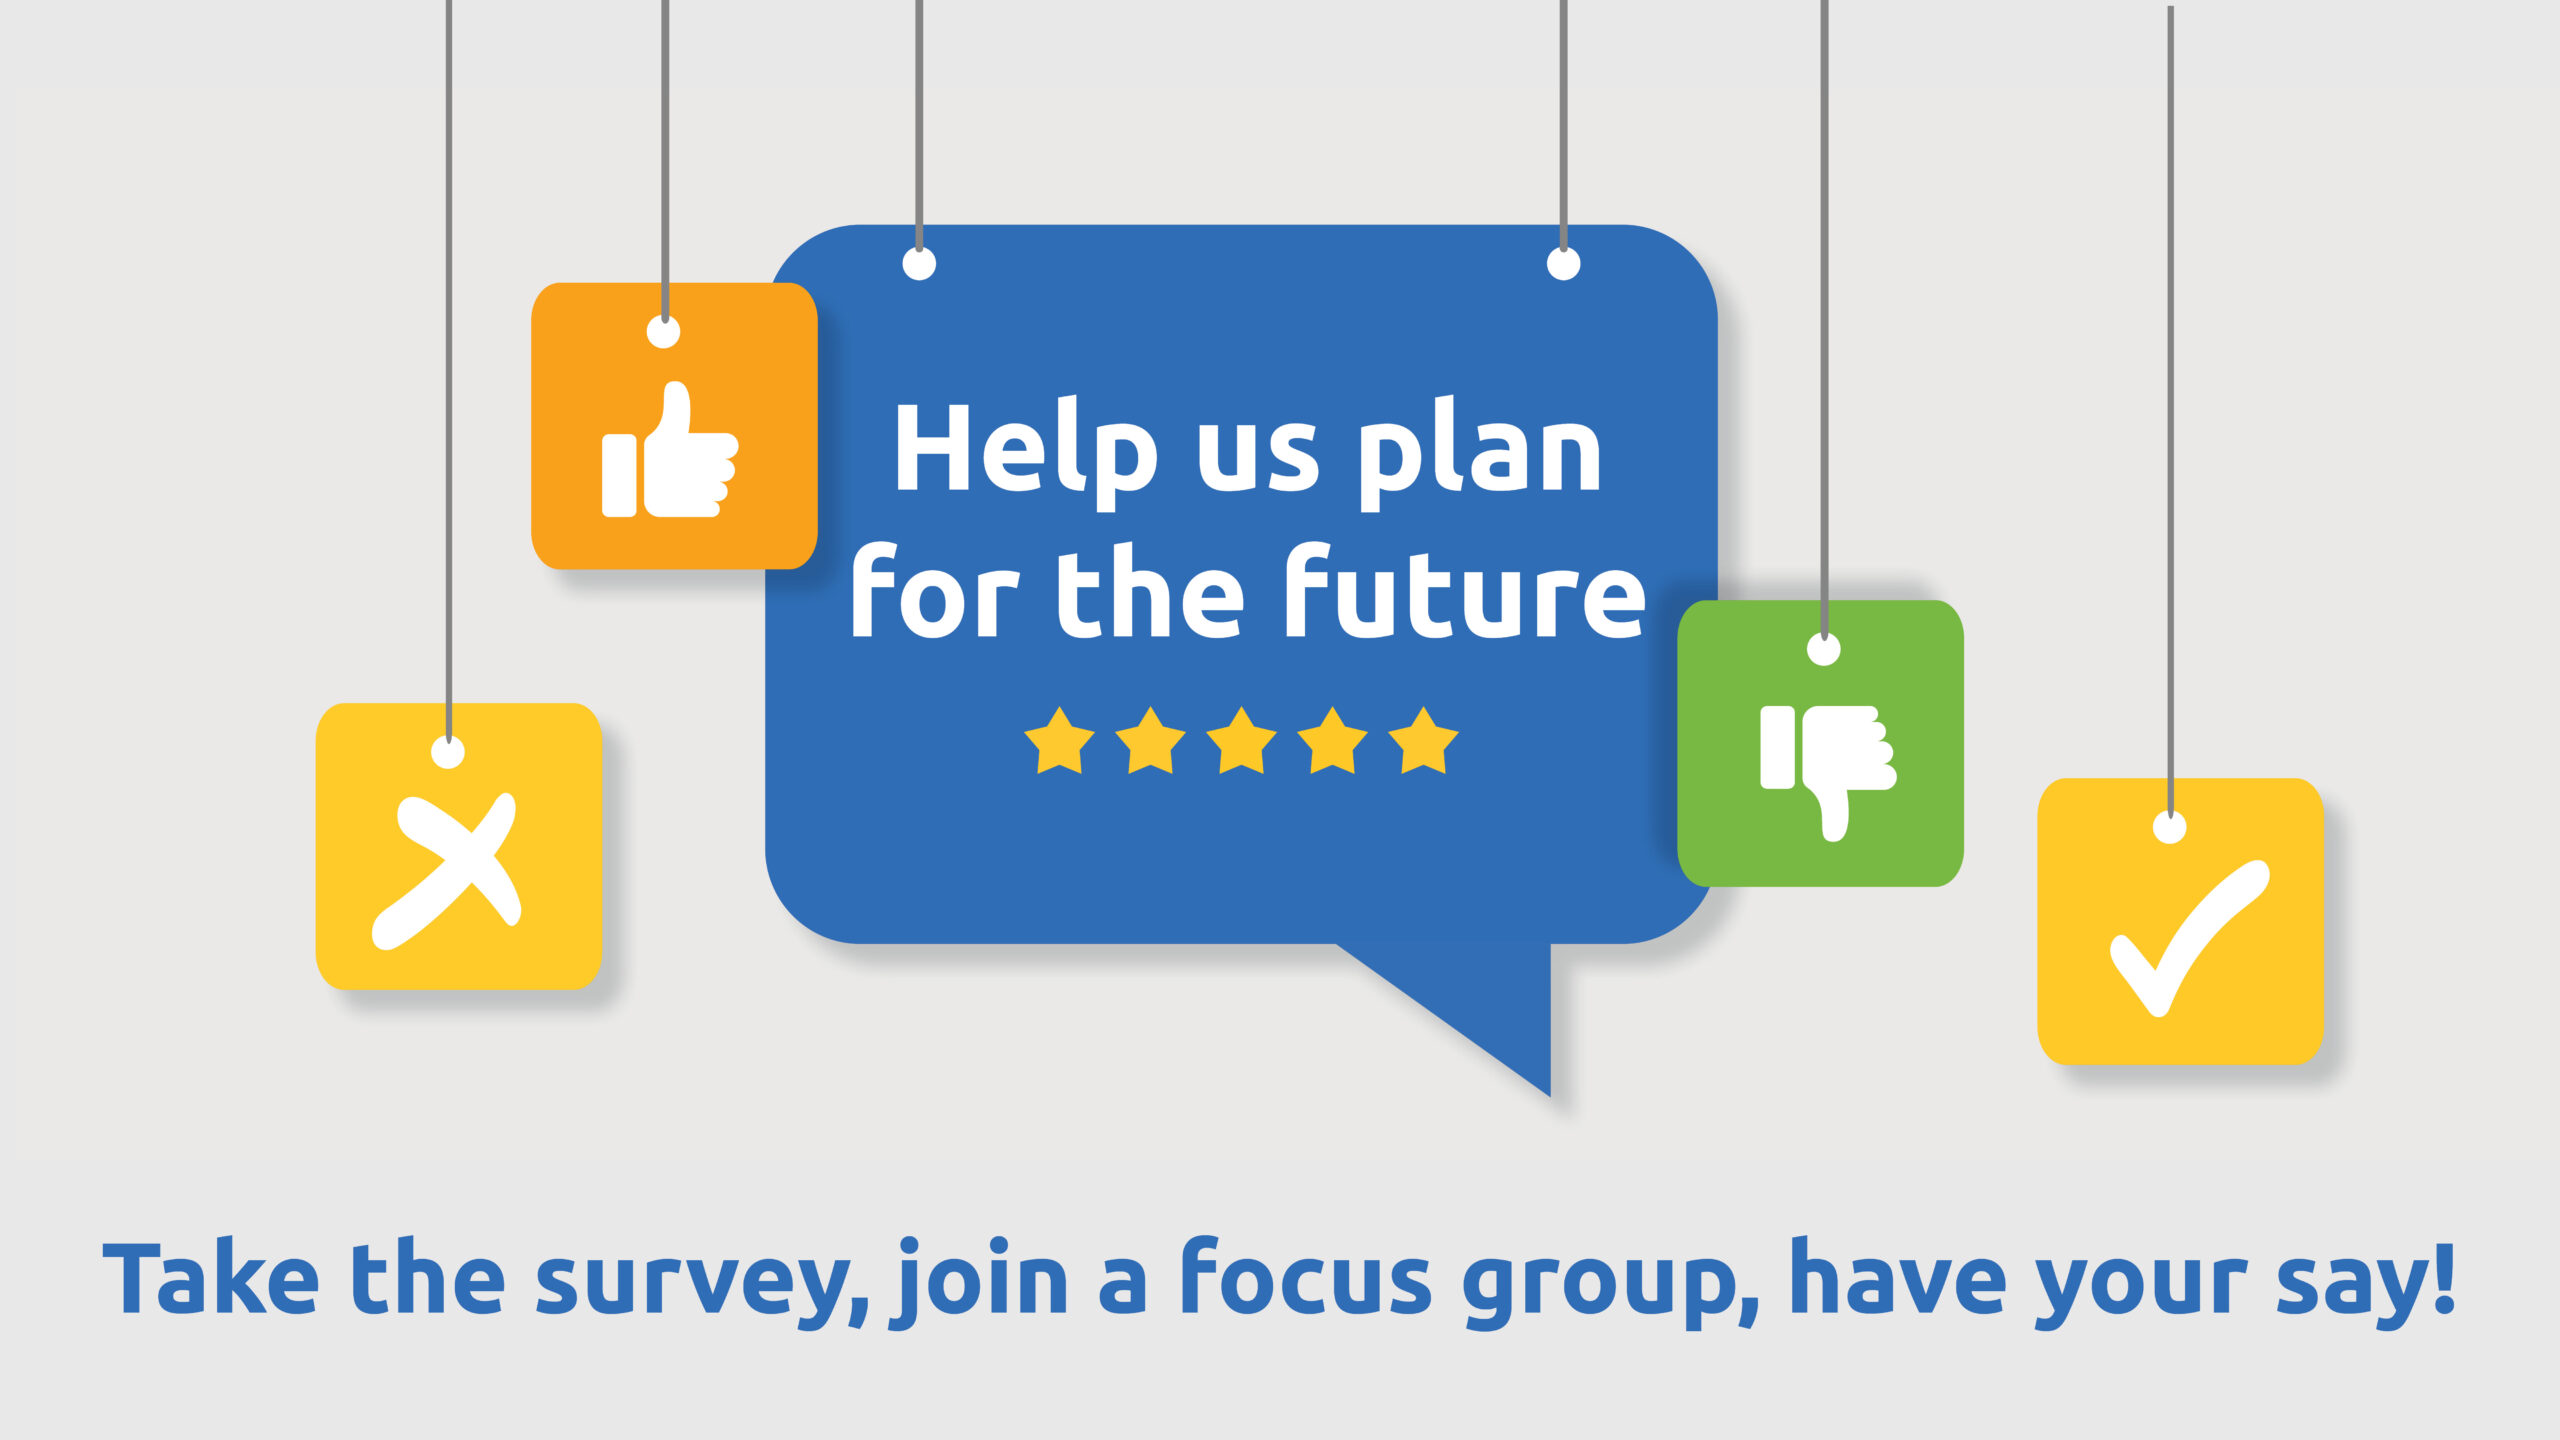 Speech bubbles with text promoting strategic plan survey and focus groups